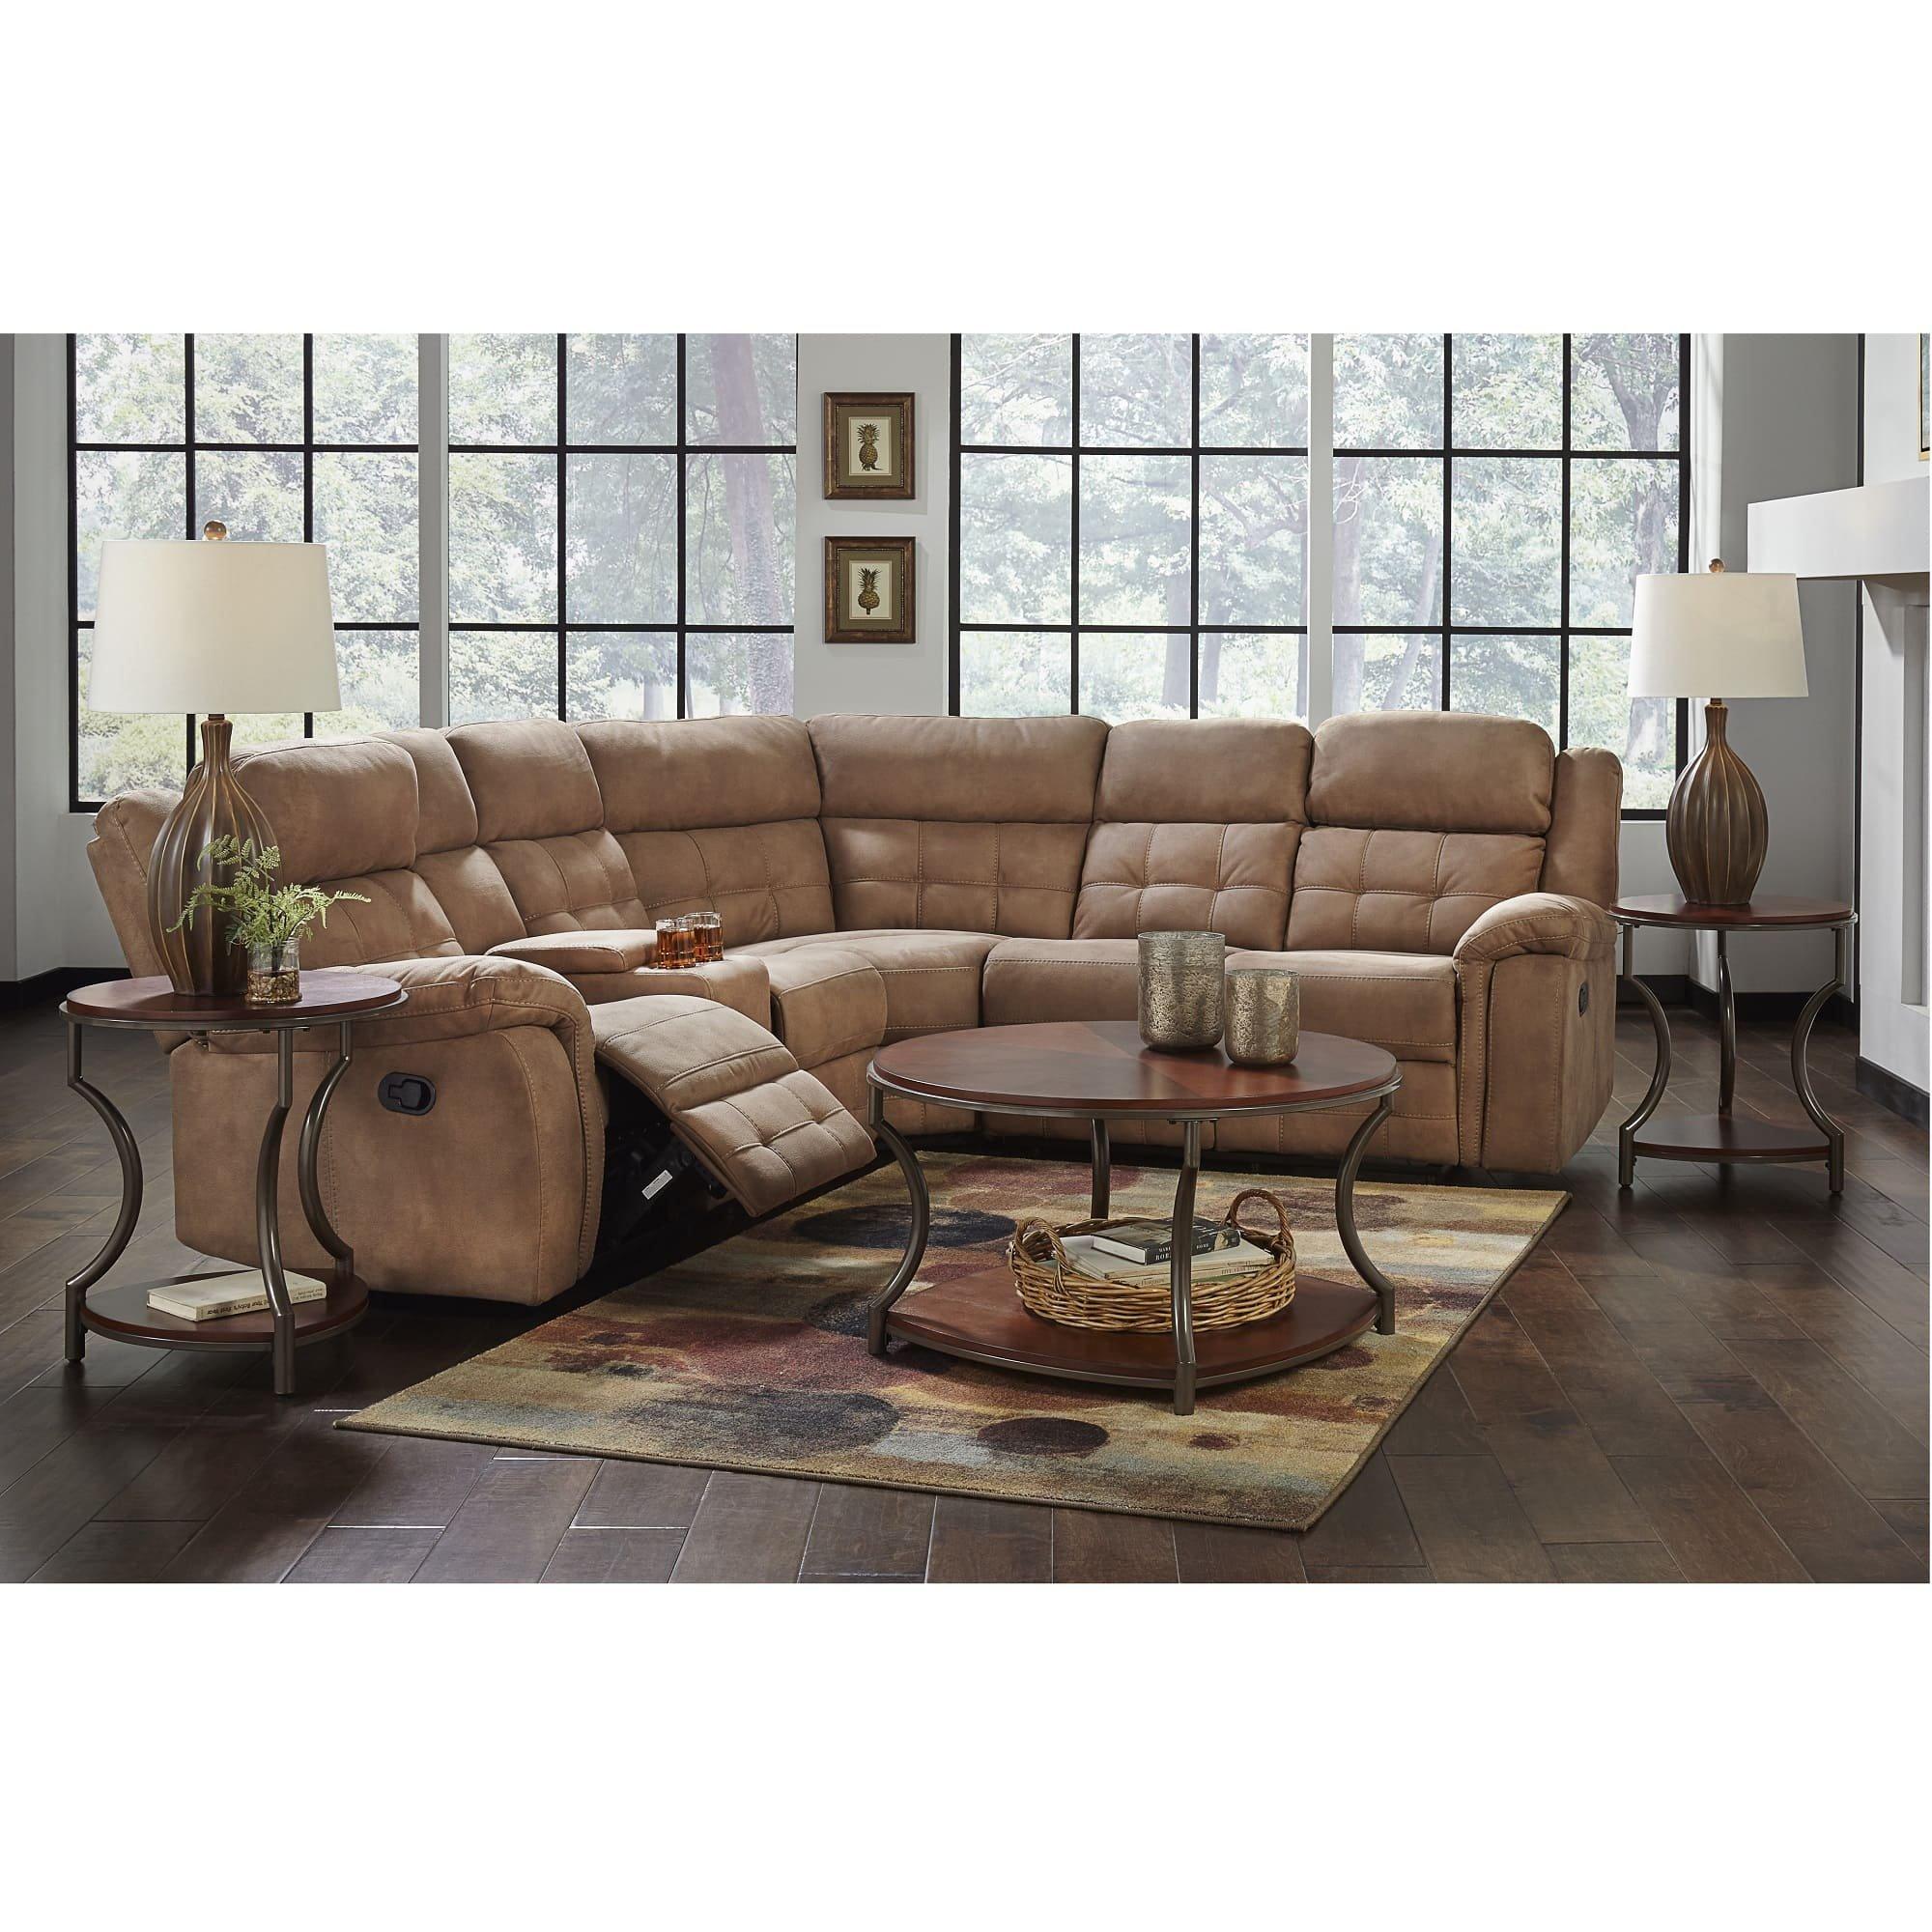 Rent To Own Amalfi 9 Piece Cobalt Reclining Sectional Living Room Collection At Aarons Today